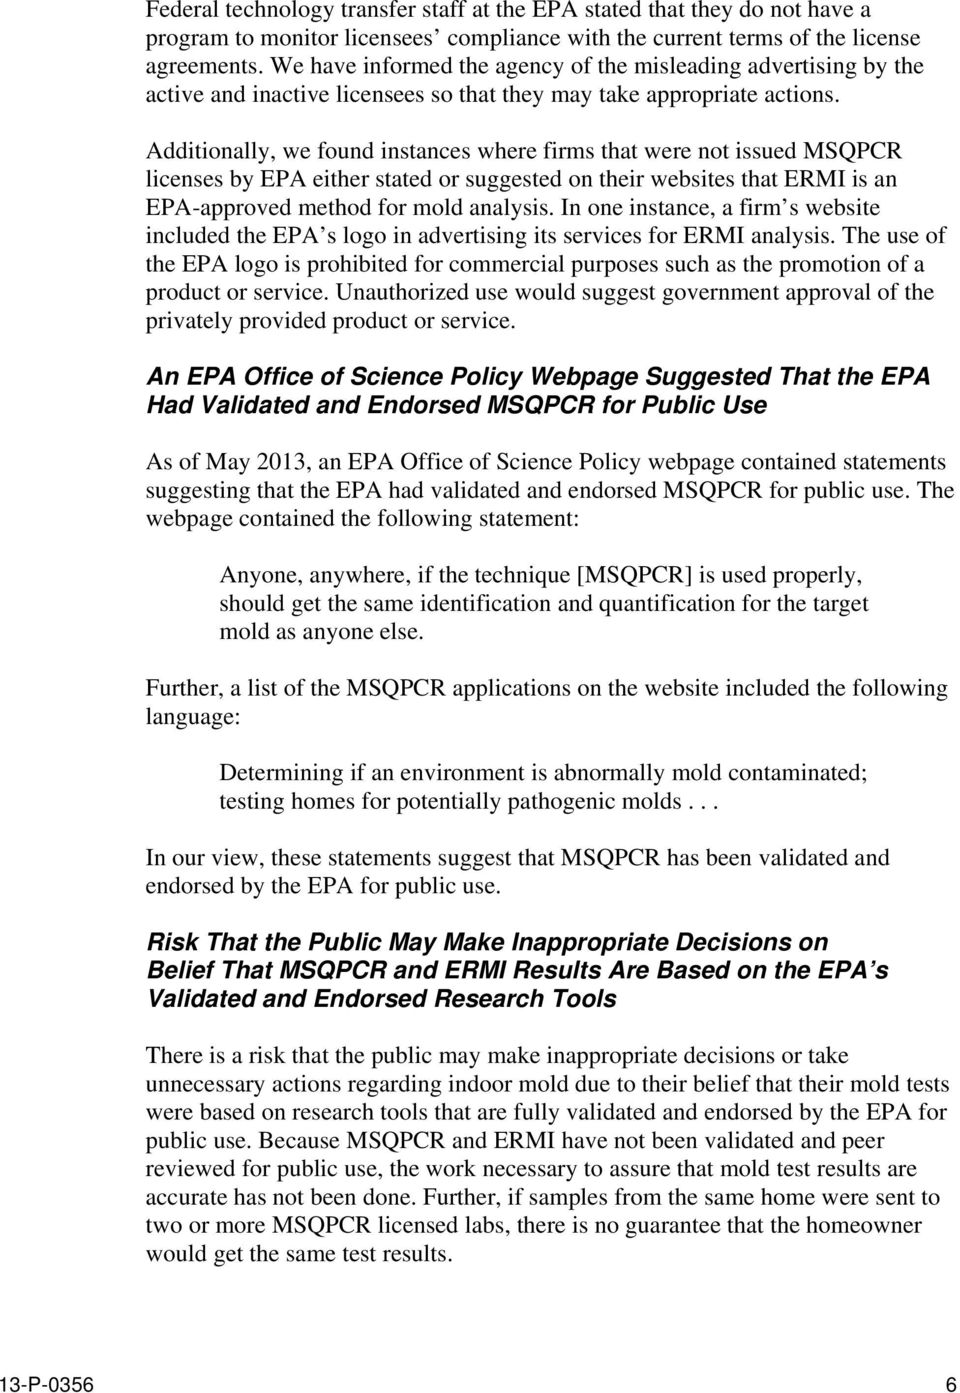 Additionally, we found instances where firms that were not issued MSQPCR licenses by EPA either stated or suggested on their websites that ERMI is an EPA-approved method for mold analysis.